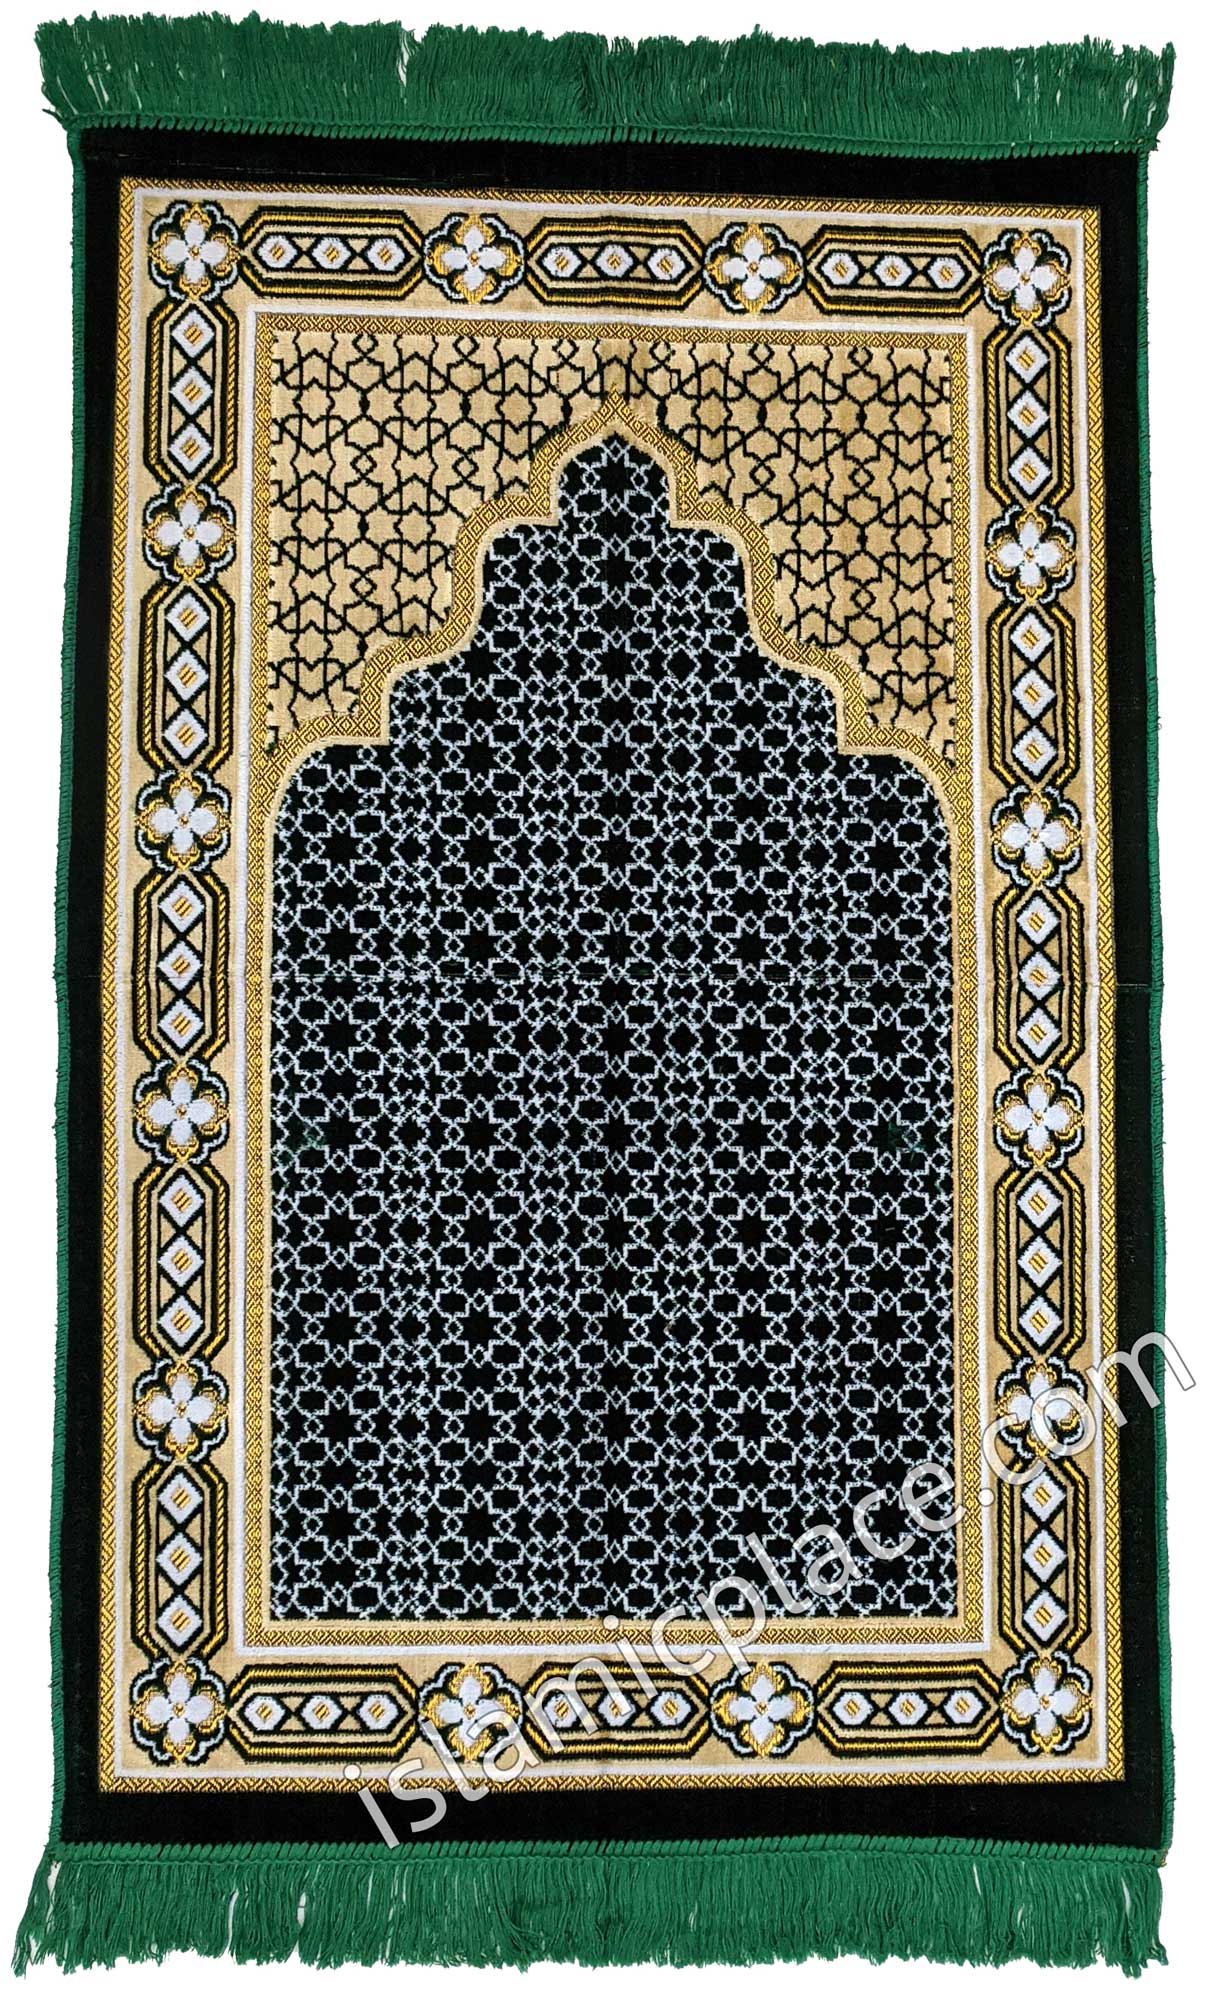 Green and Tan Prayer Rug with Grill Mihrab